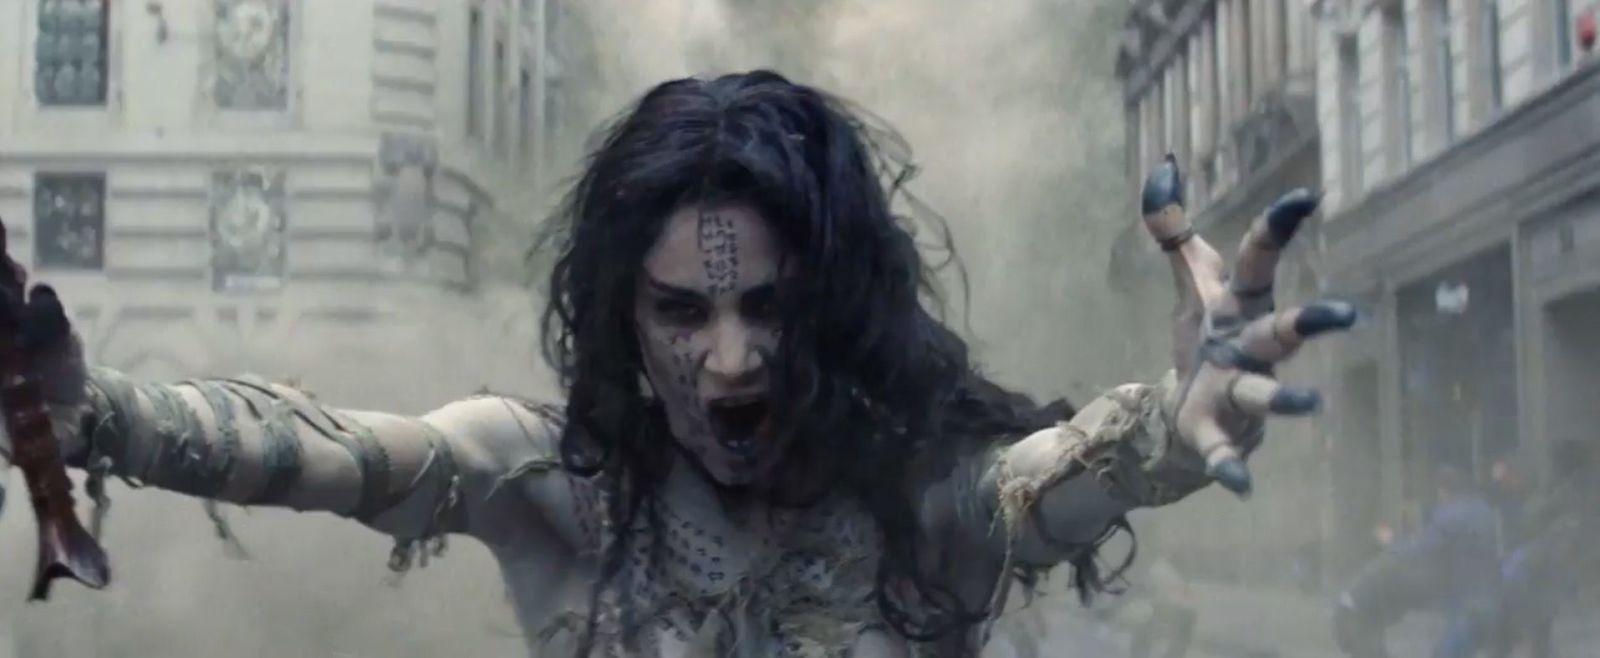 The Mummy 2017 cast, trailer, release date, plot and everything you